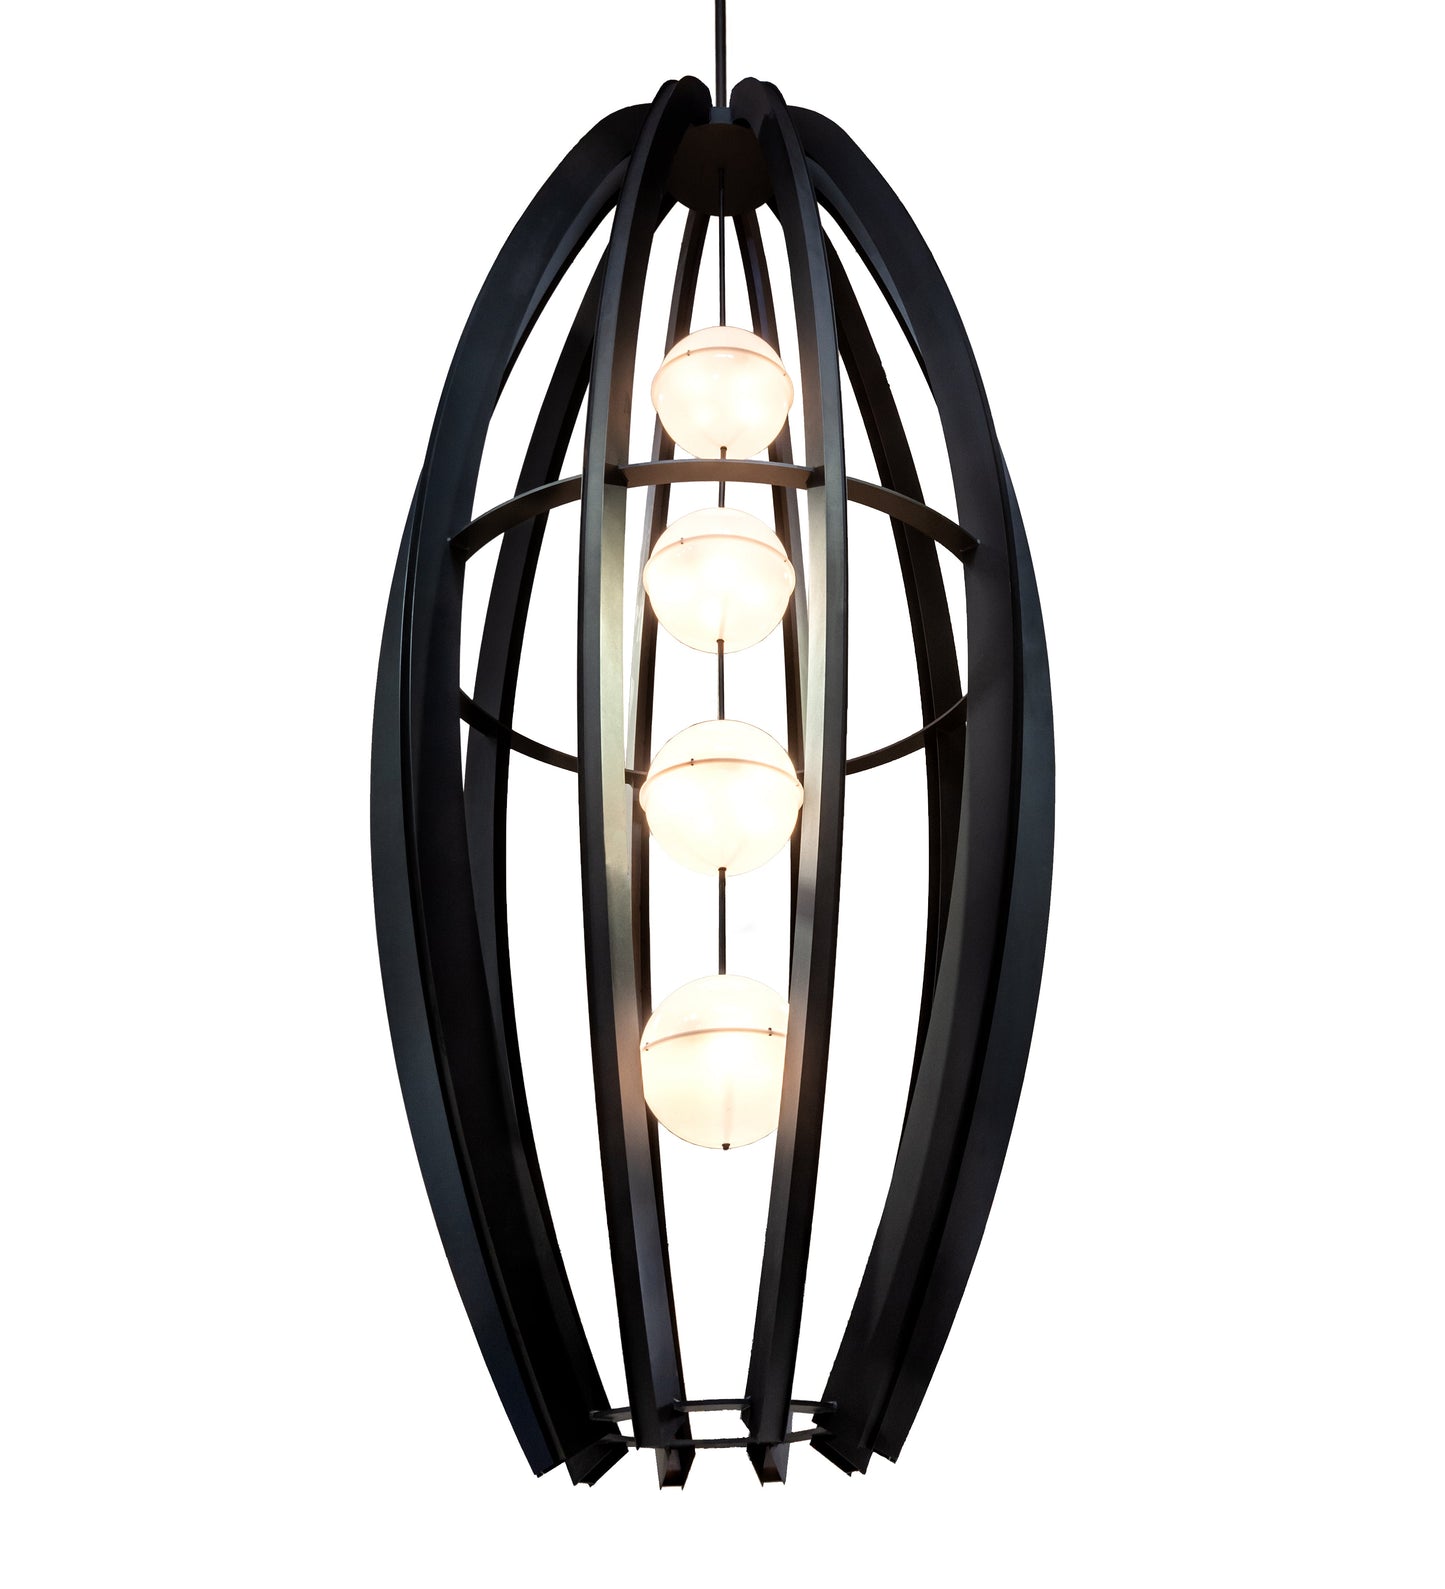 72" Willowbend Zeppelin Pendant by 2nd Ave Lighting